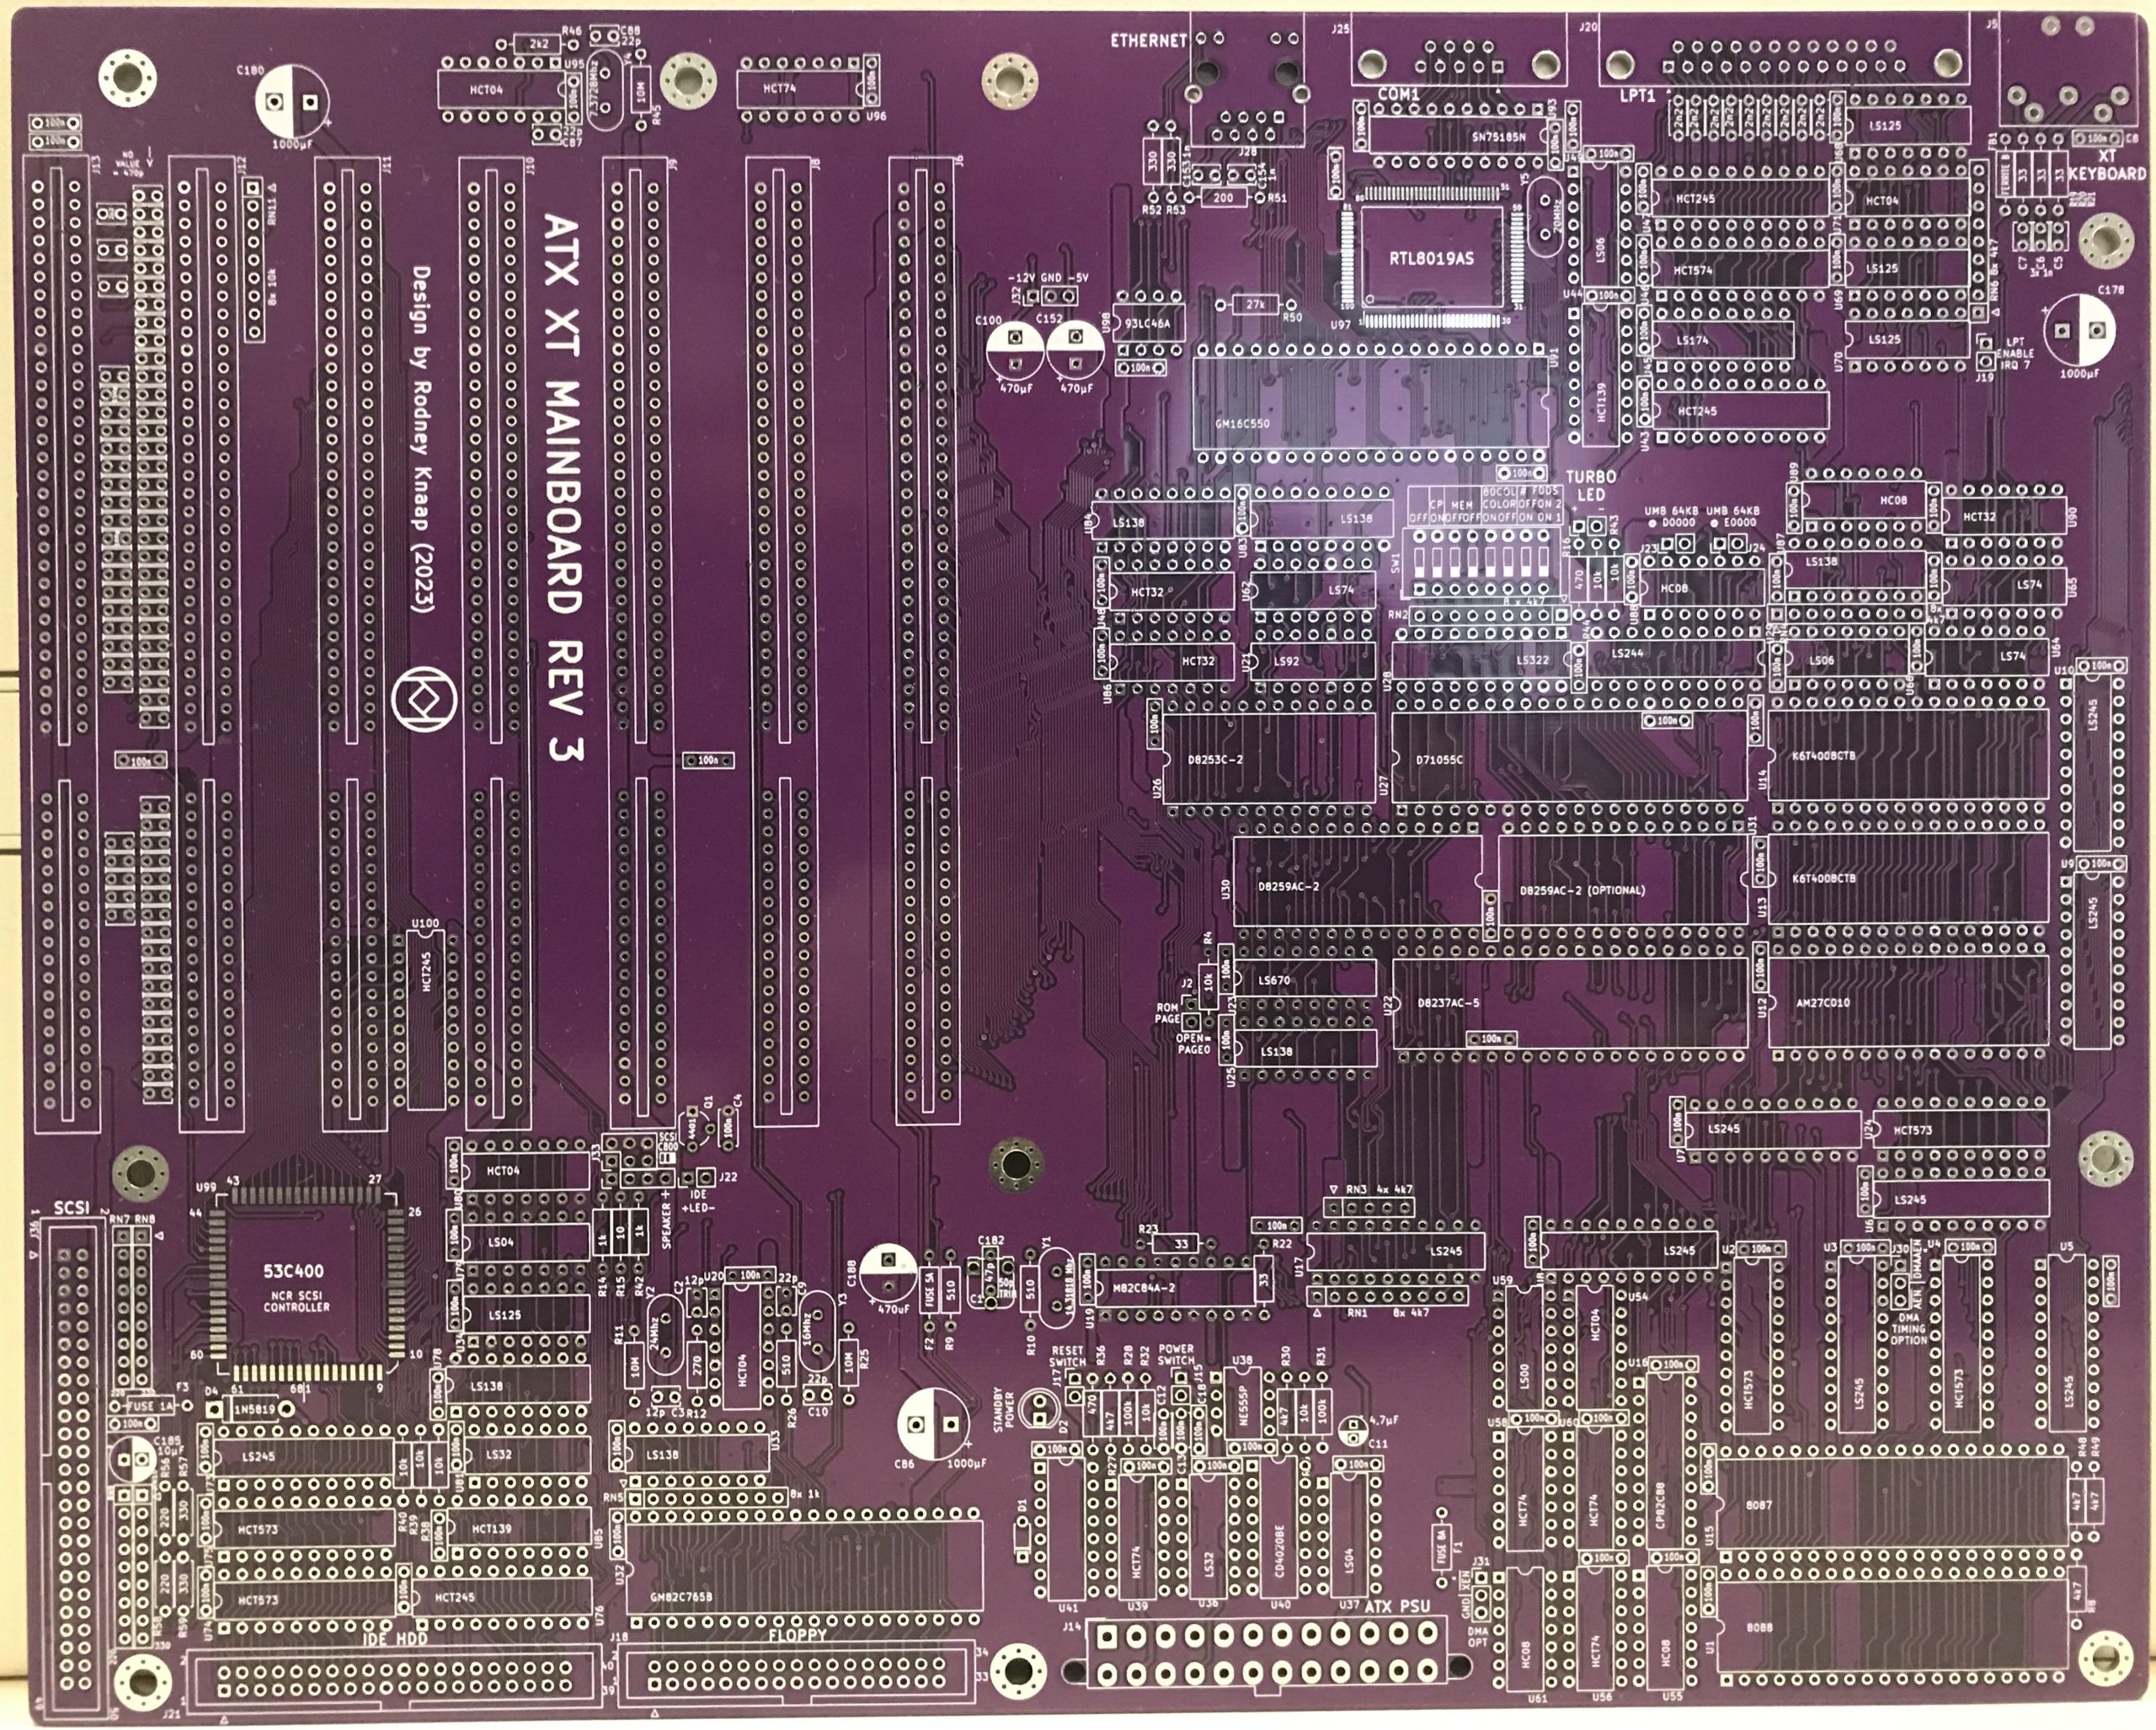 The bare PCB, as received from the JLCPCB factory in China